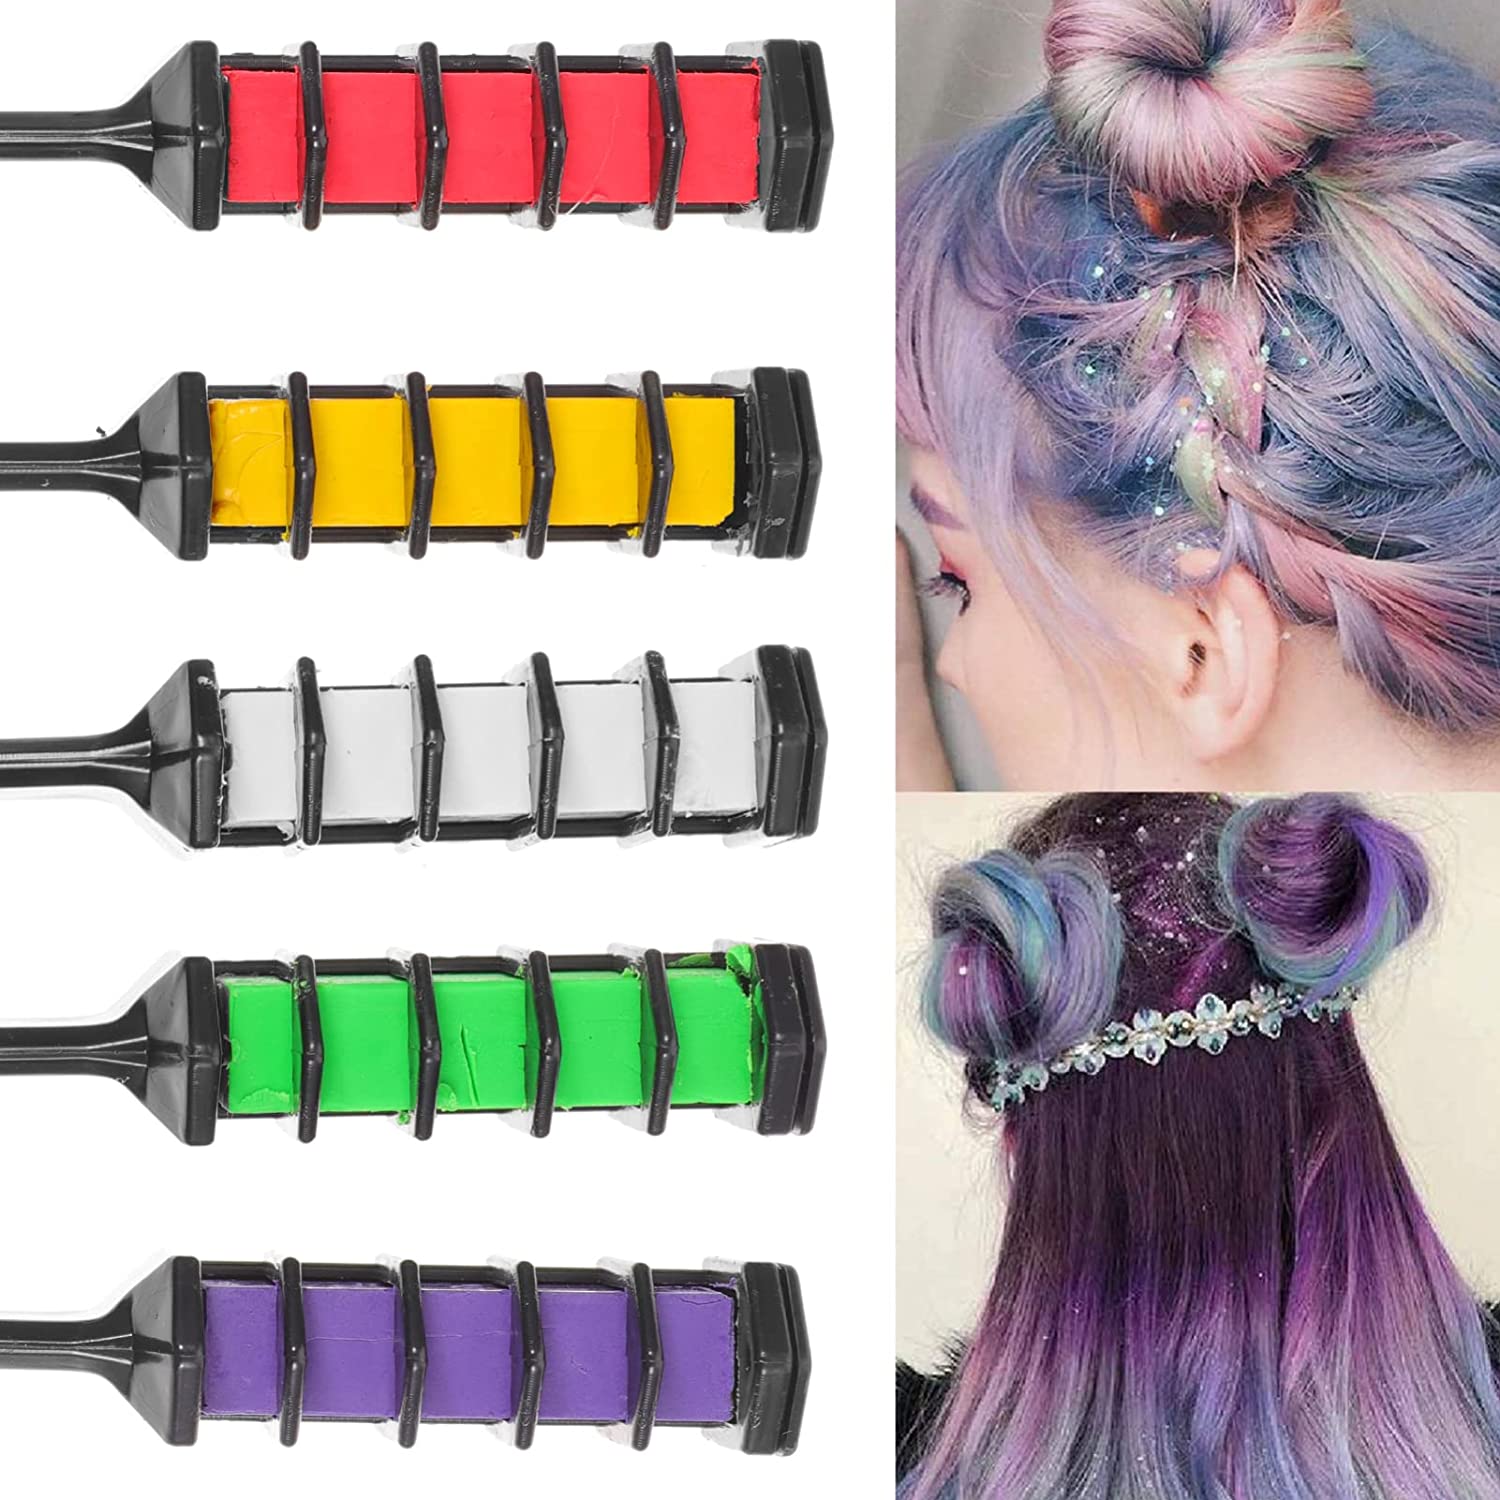 10 Best Temporary Hair Chalks To Buy In 2023